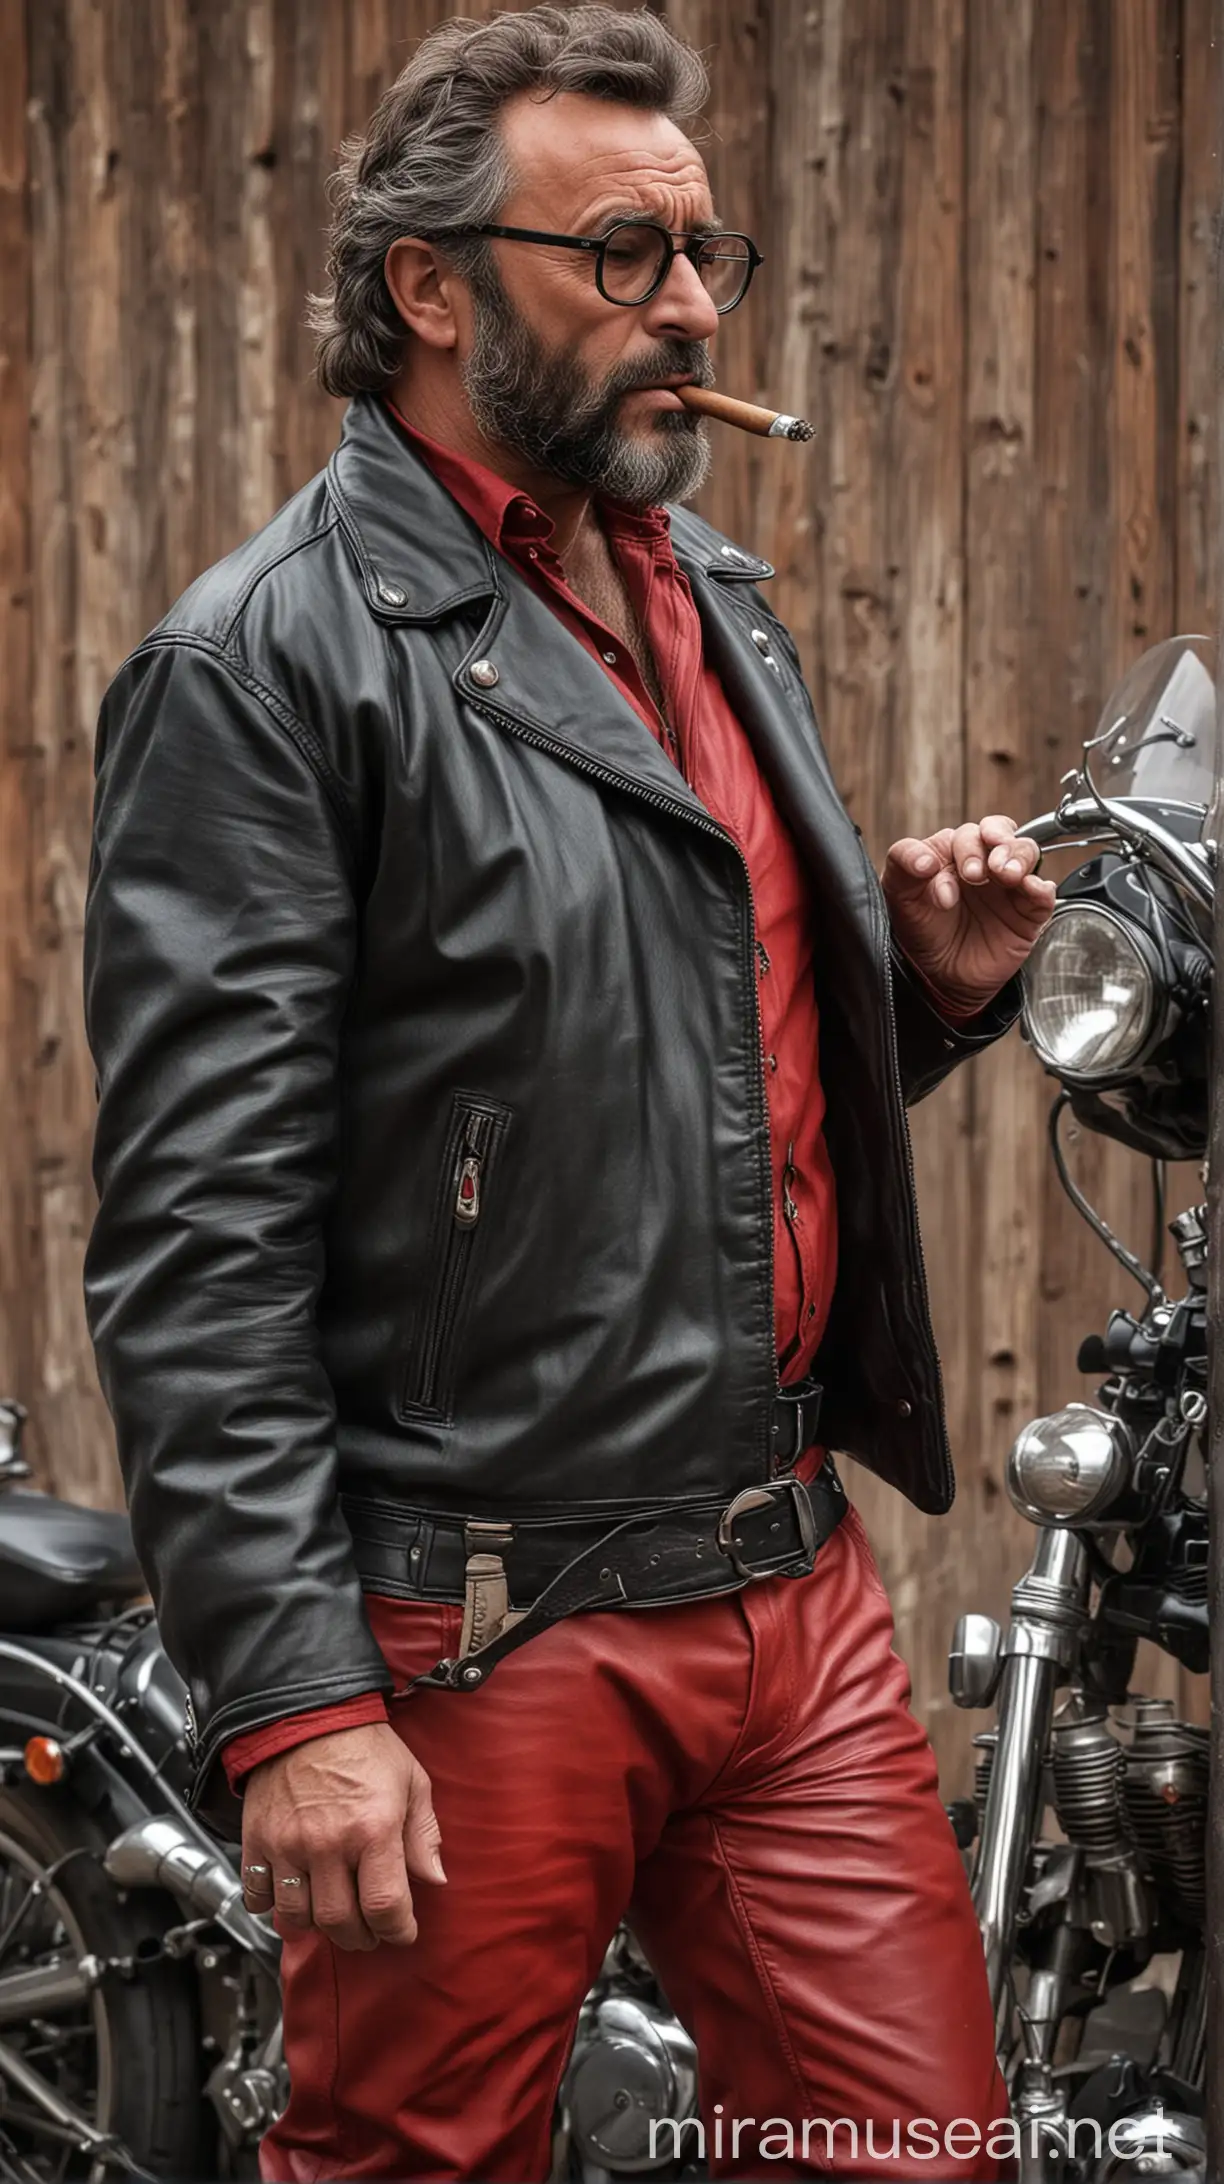 A masculine thick powerful and ruggedly handsome Peter Falk smoking a big cigar muscled and bearded biker black leathers jacket and red leather tight pants wearing glasses